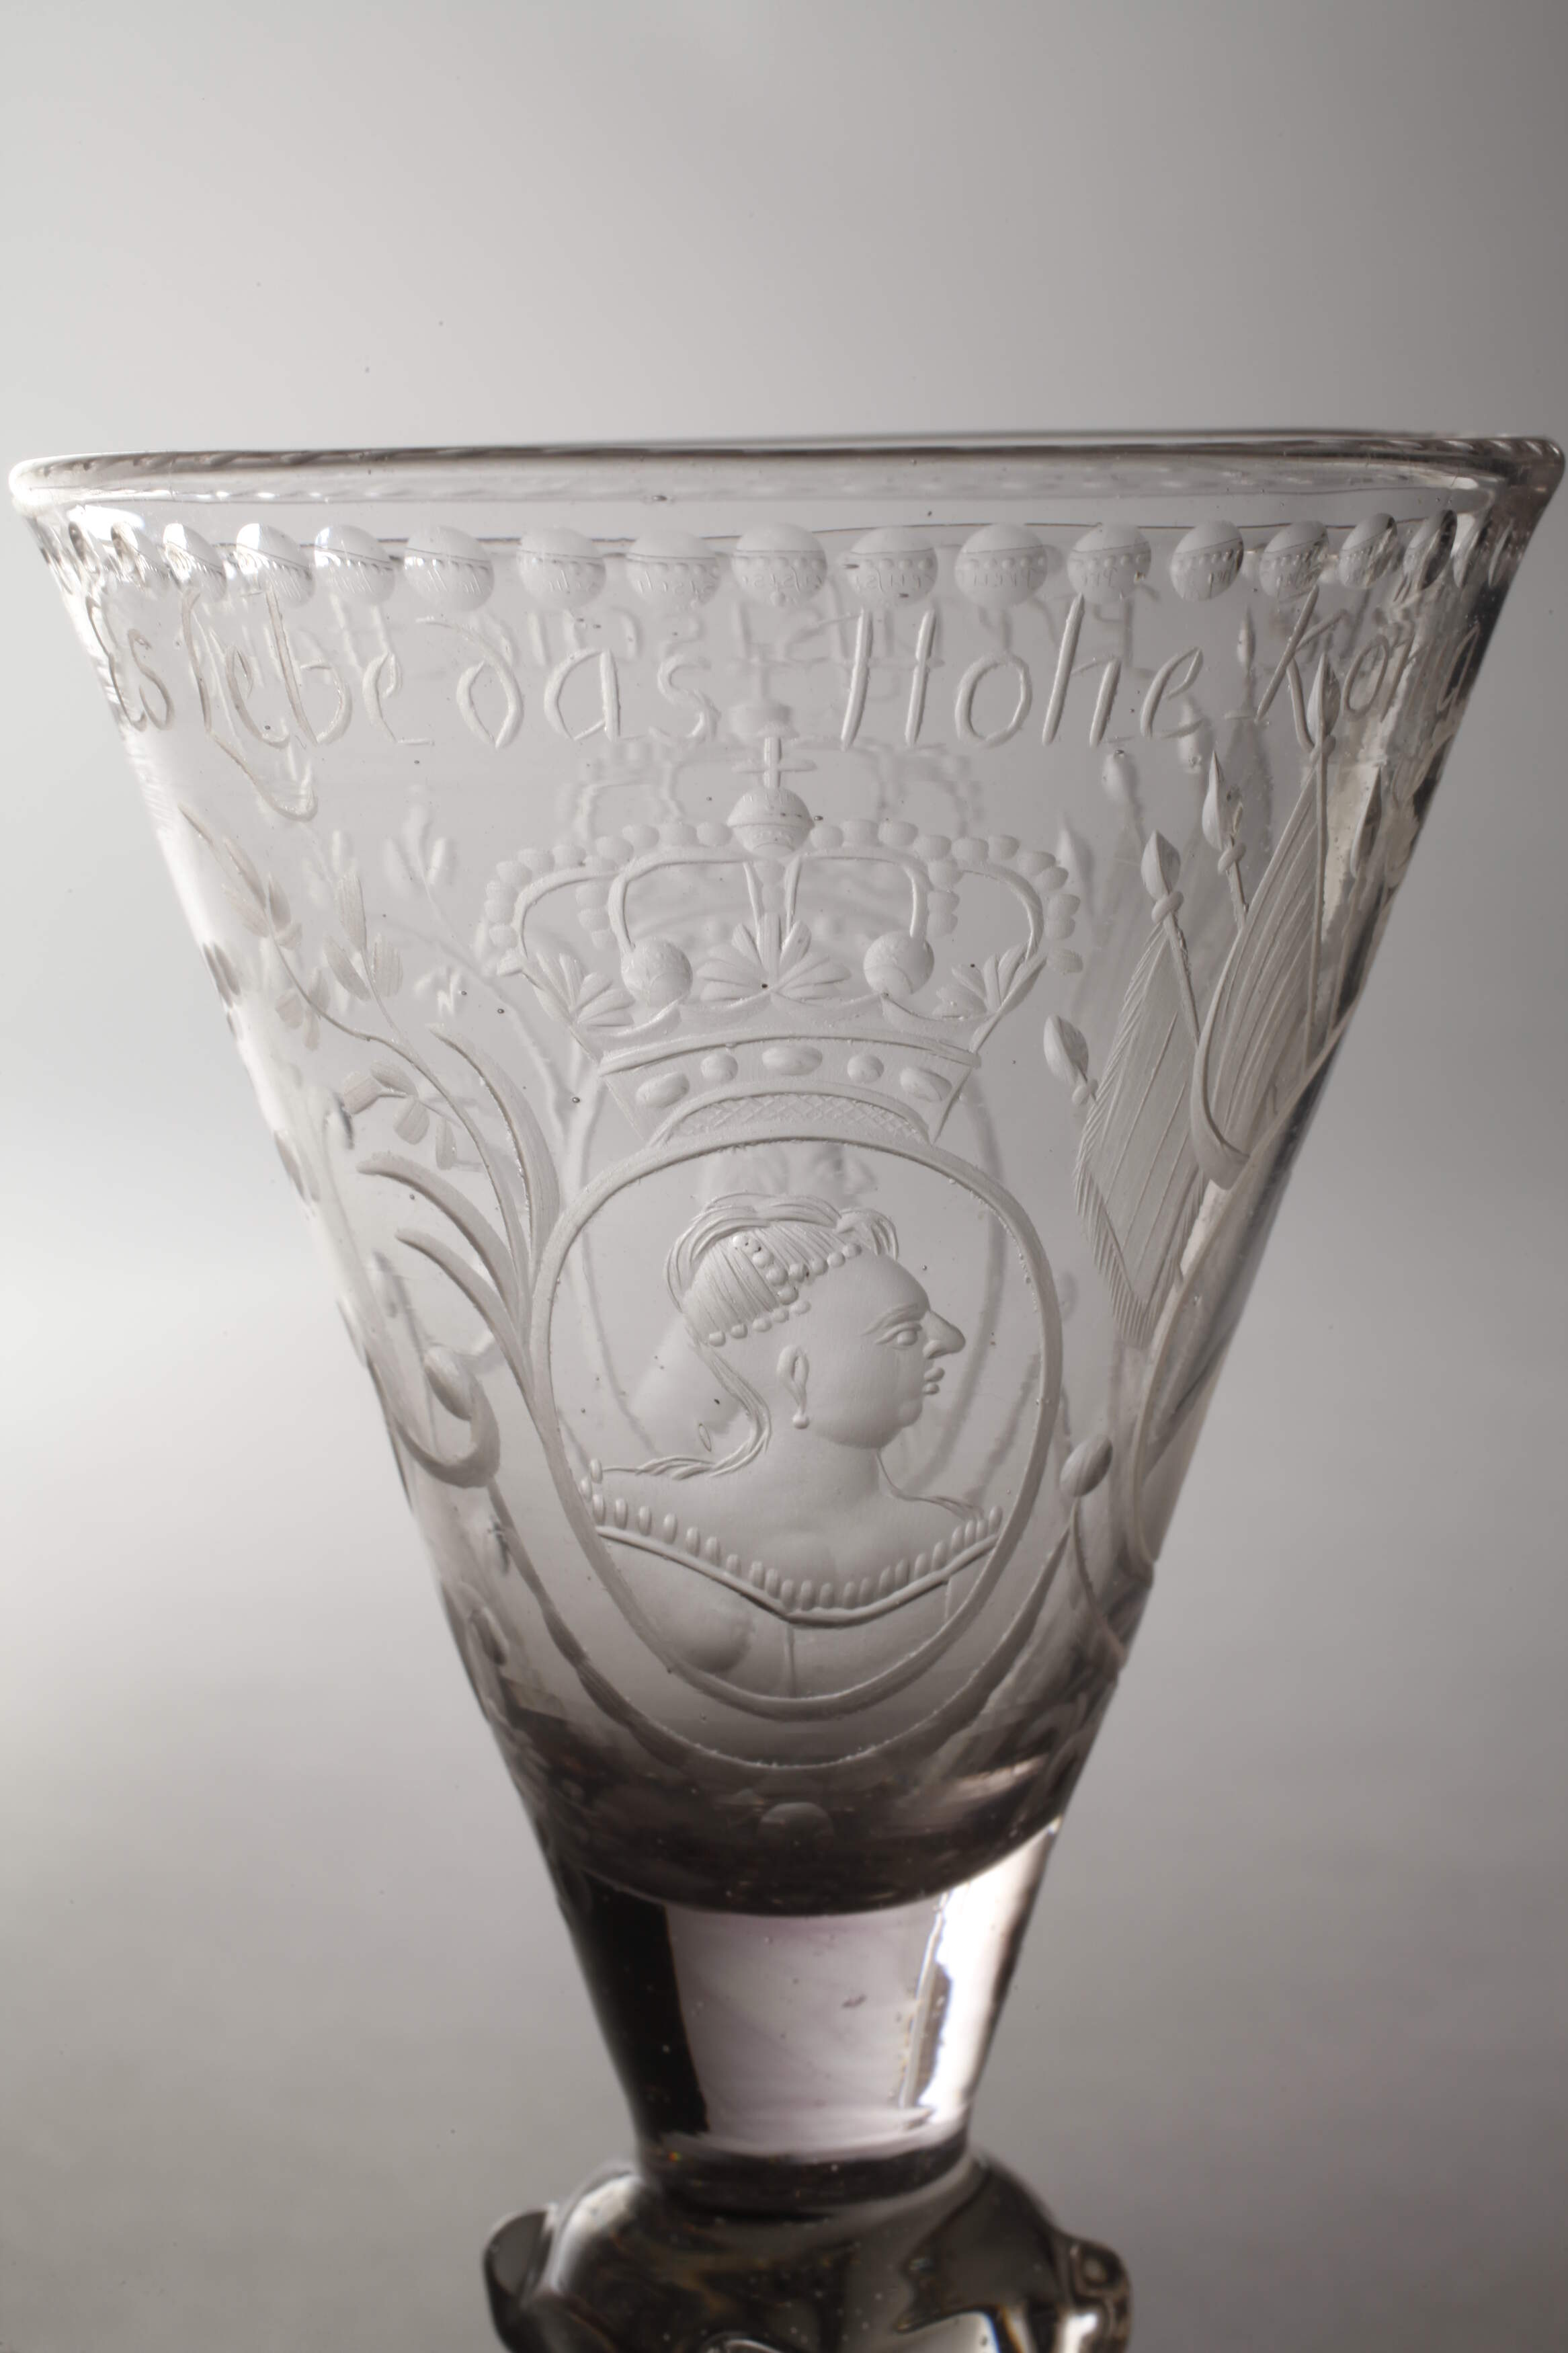 Spouted goblet from the Prussian royal house - Image 2 of 6